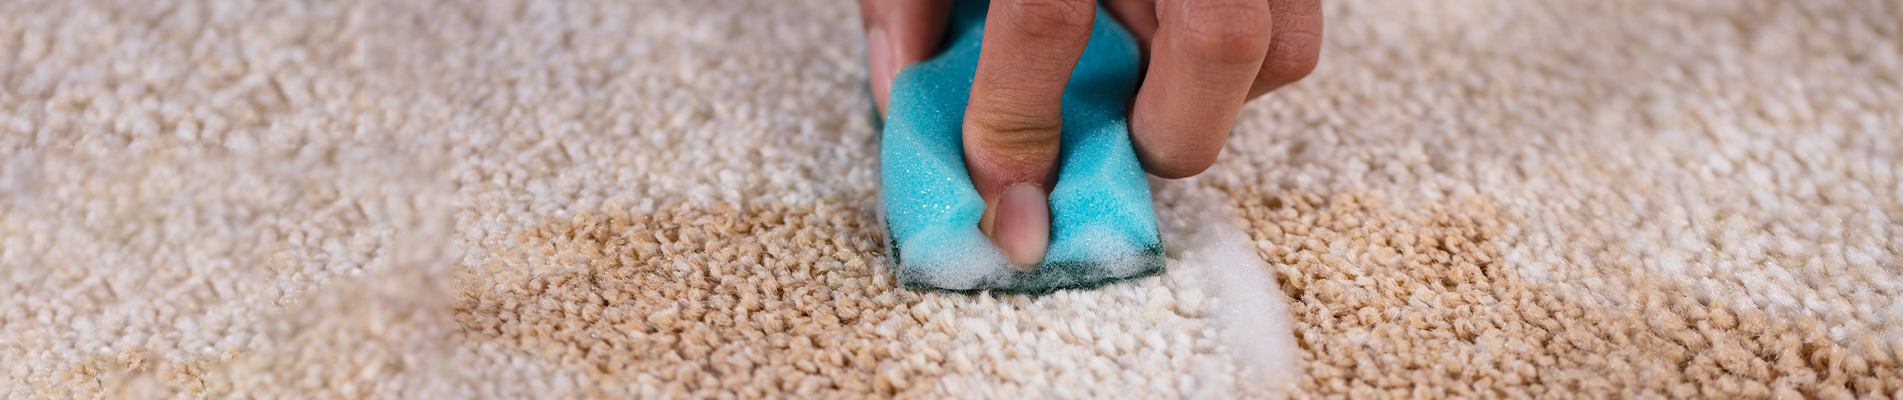 removing stain from rug